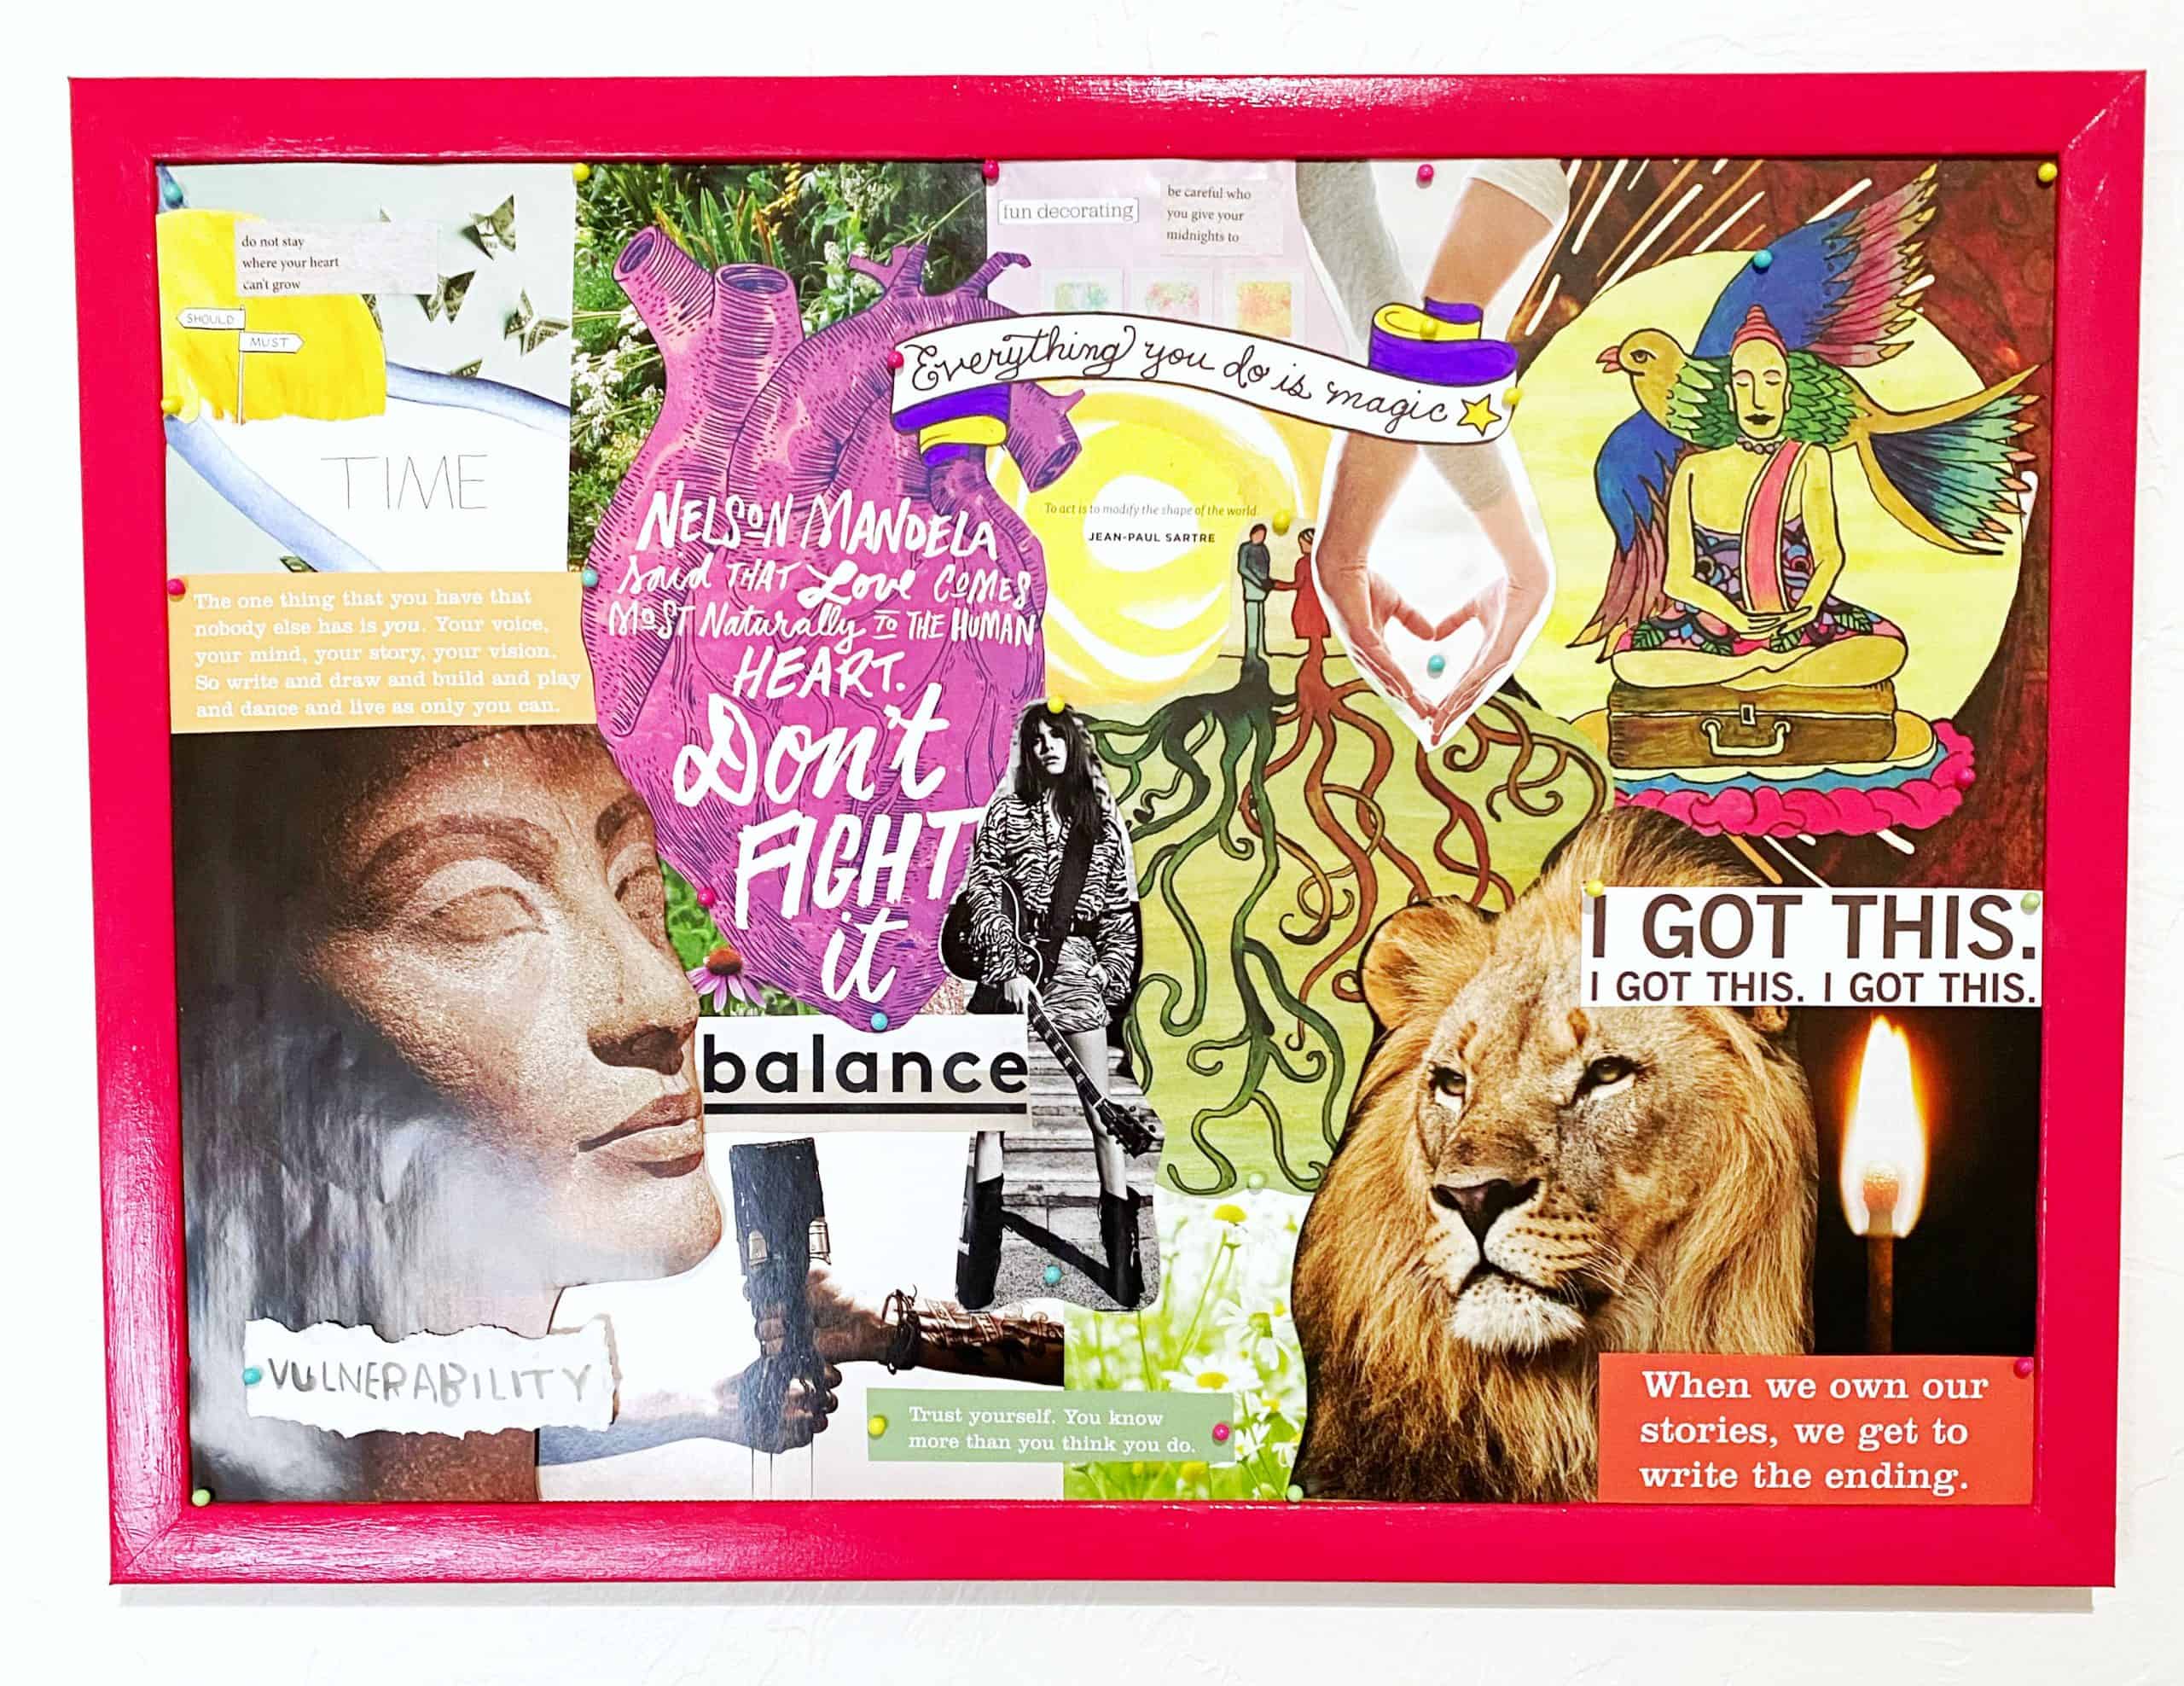 How to Make a Dream or Vision Board